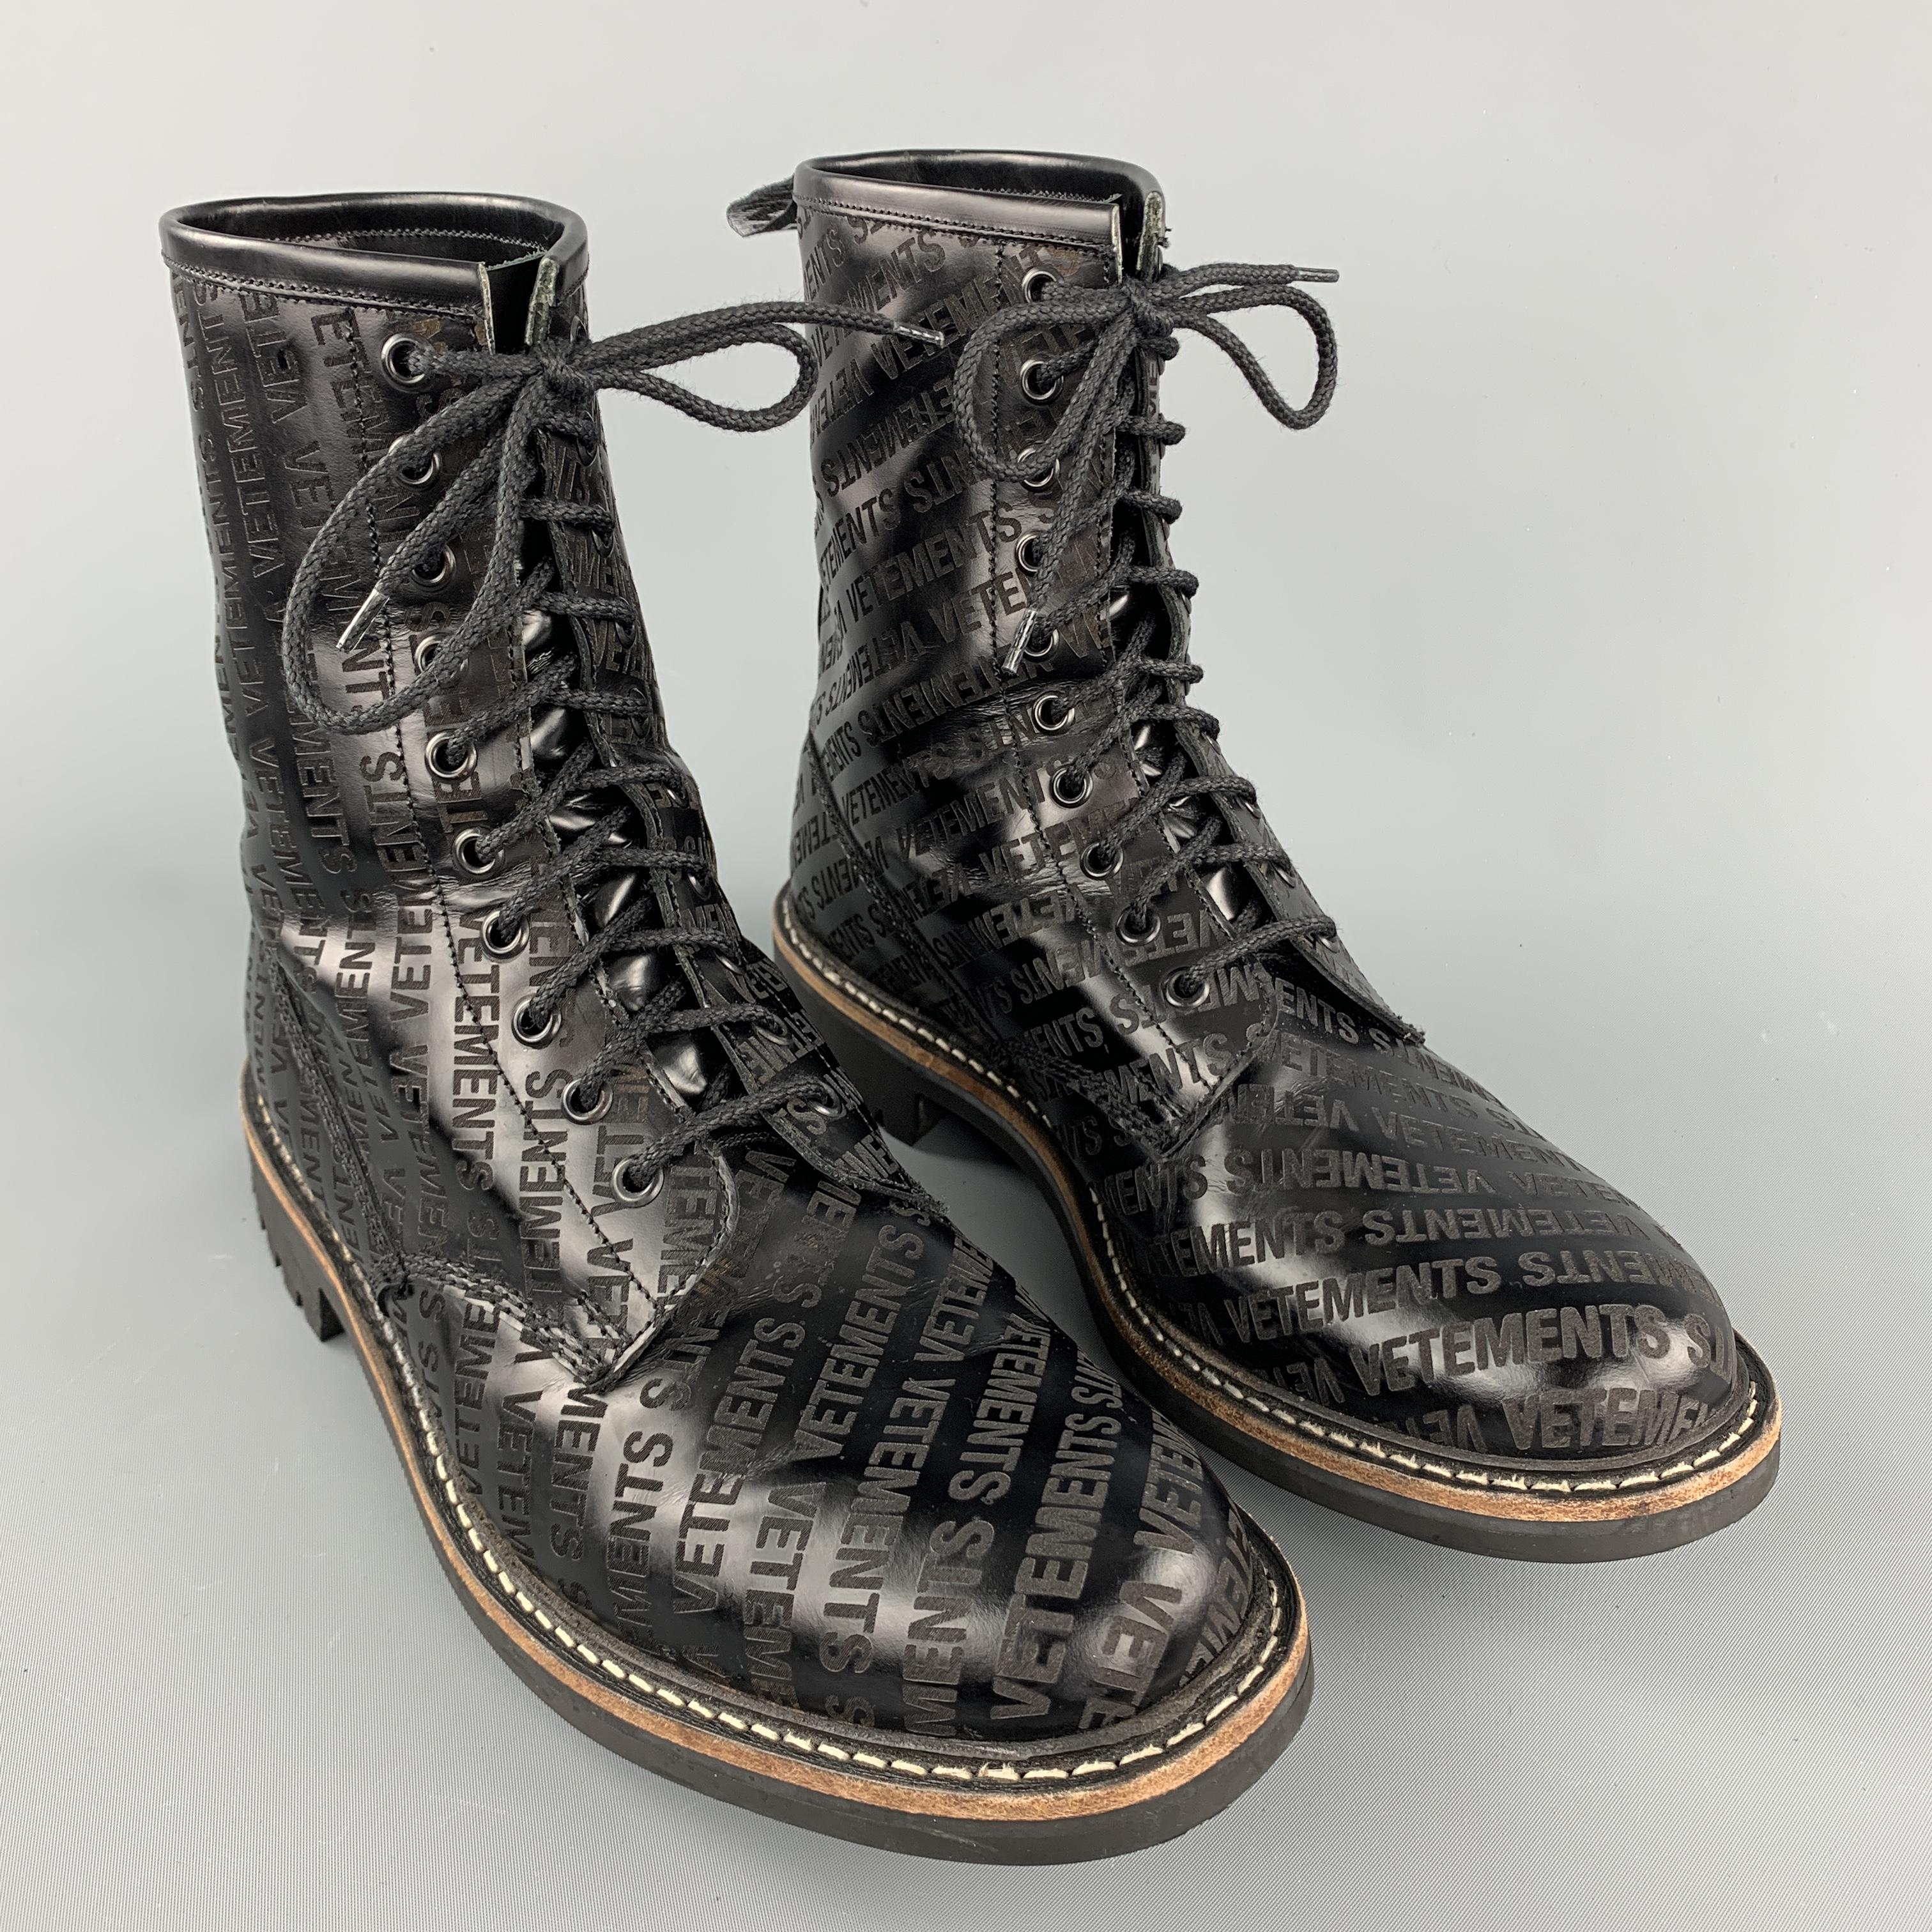 VETEMENTS CHURCH'S lace up boots comes in a shiny embossed black leather material, with tone-on-tone laces, branded loop at back, black rubber sole, and a lather tim. Made in England. 

Excellent Pre-Owned Condition.
Marked: No